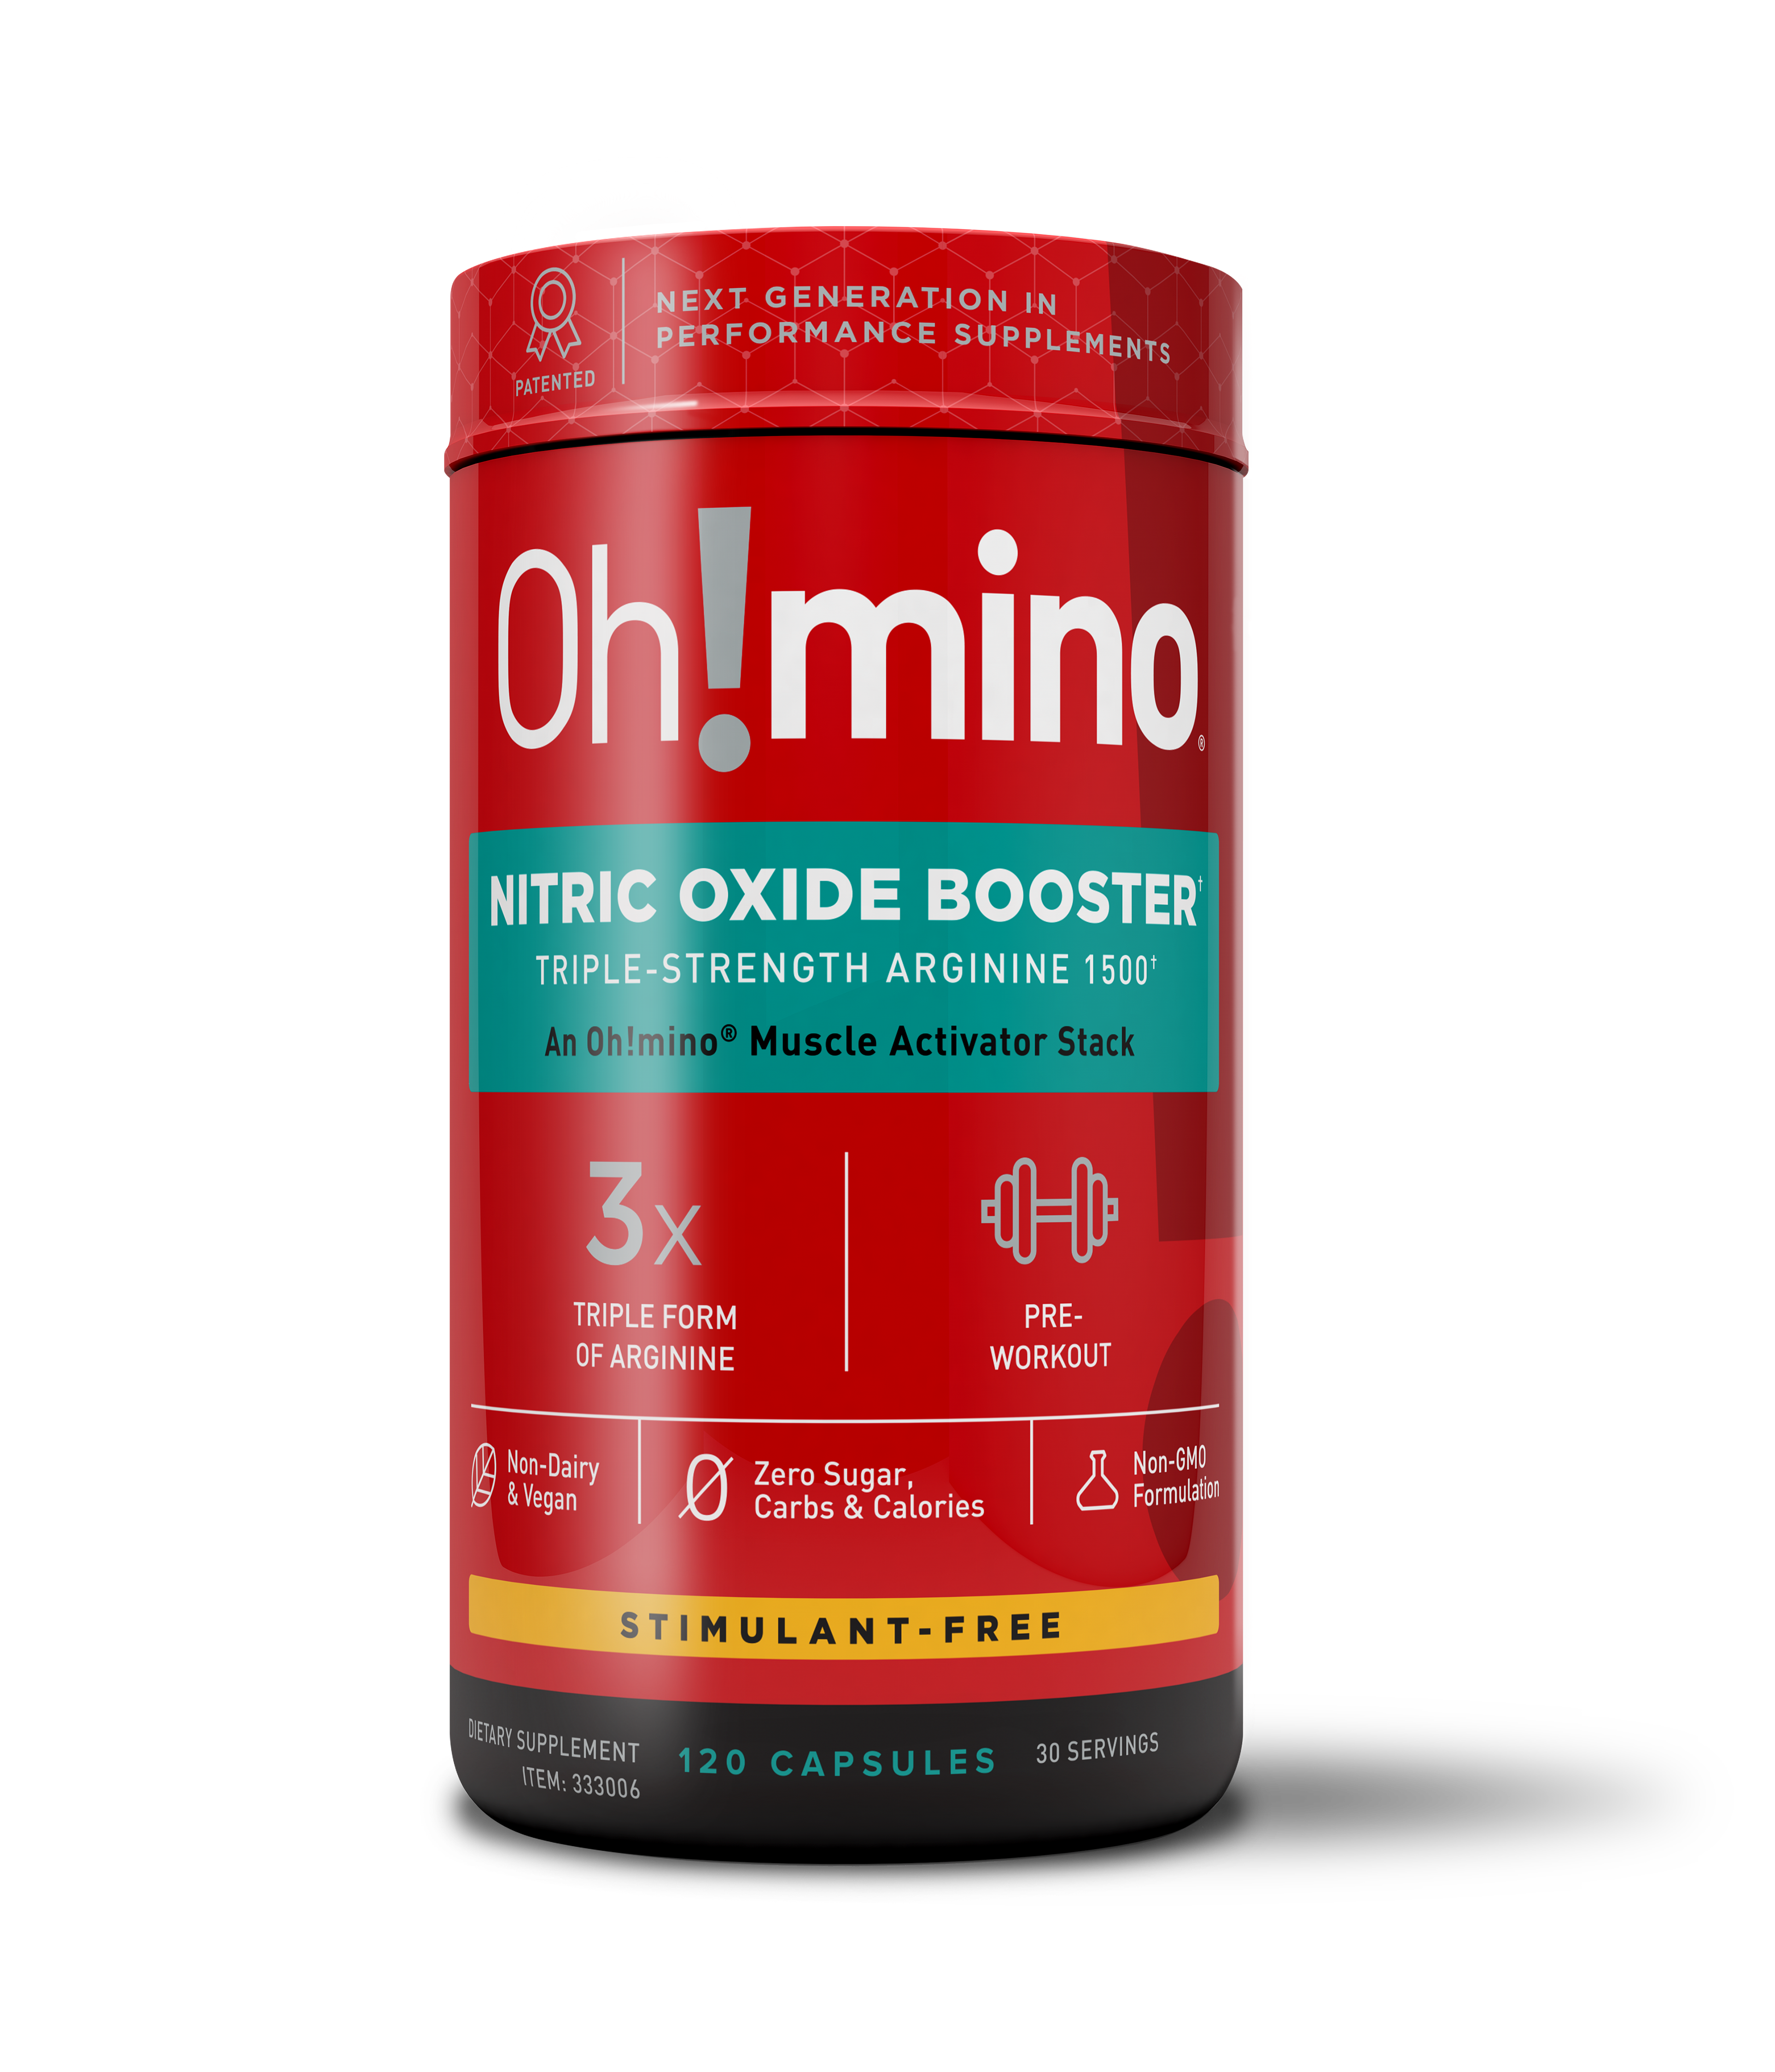 Oh!mino Nitric Oxide Booster BFF Service